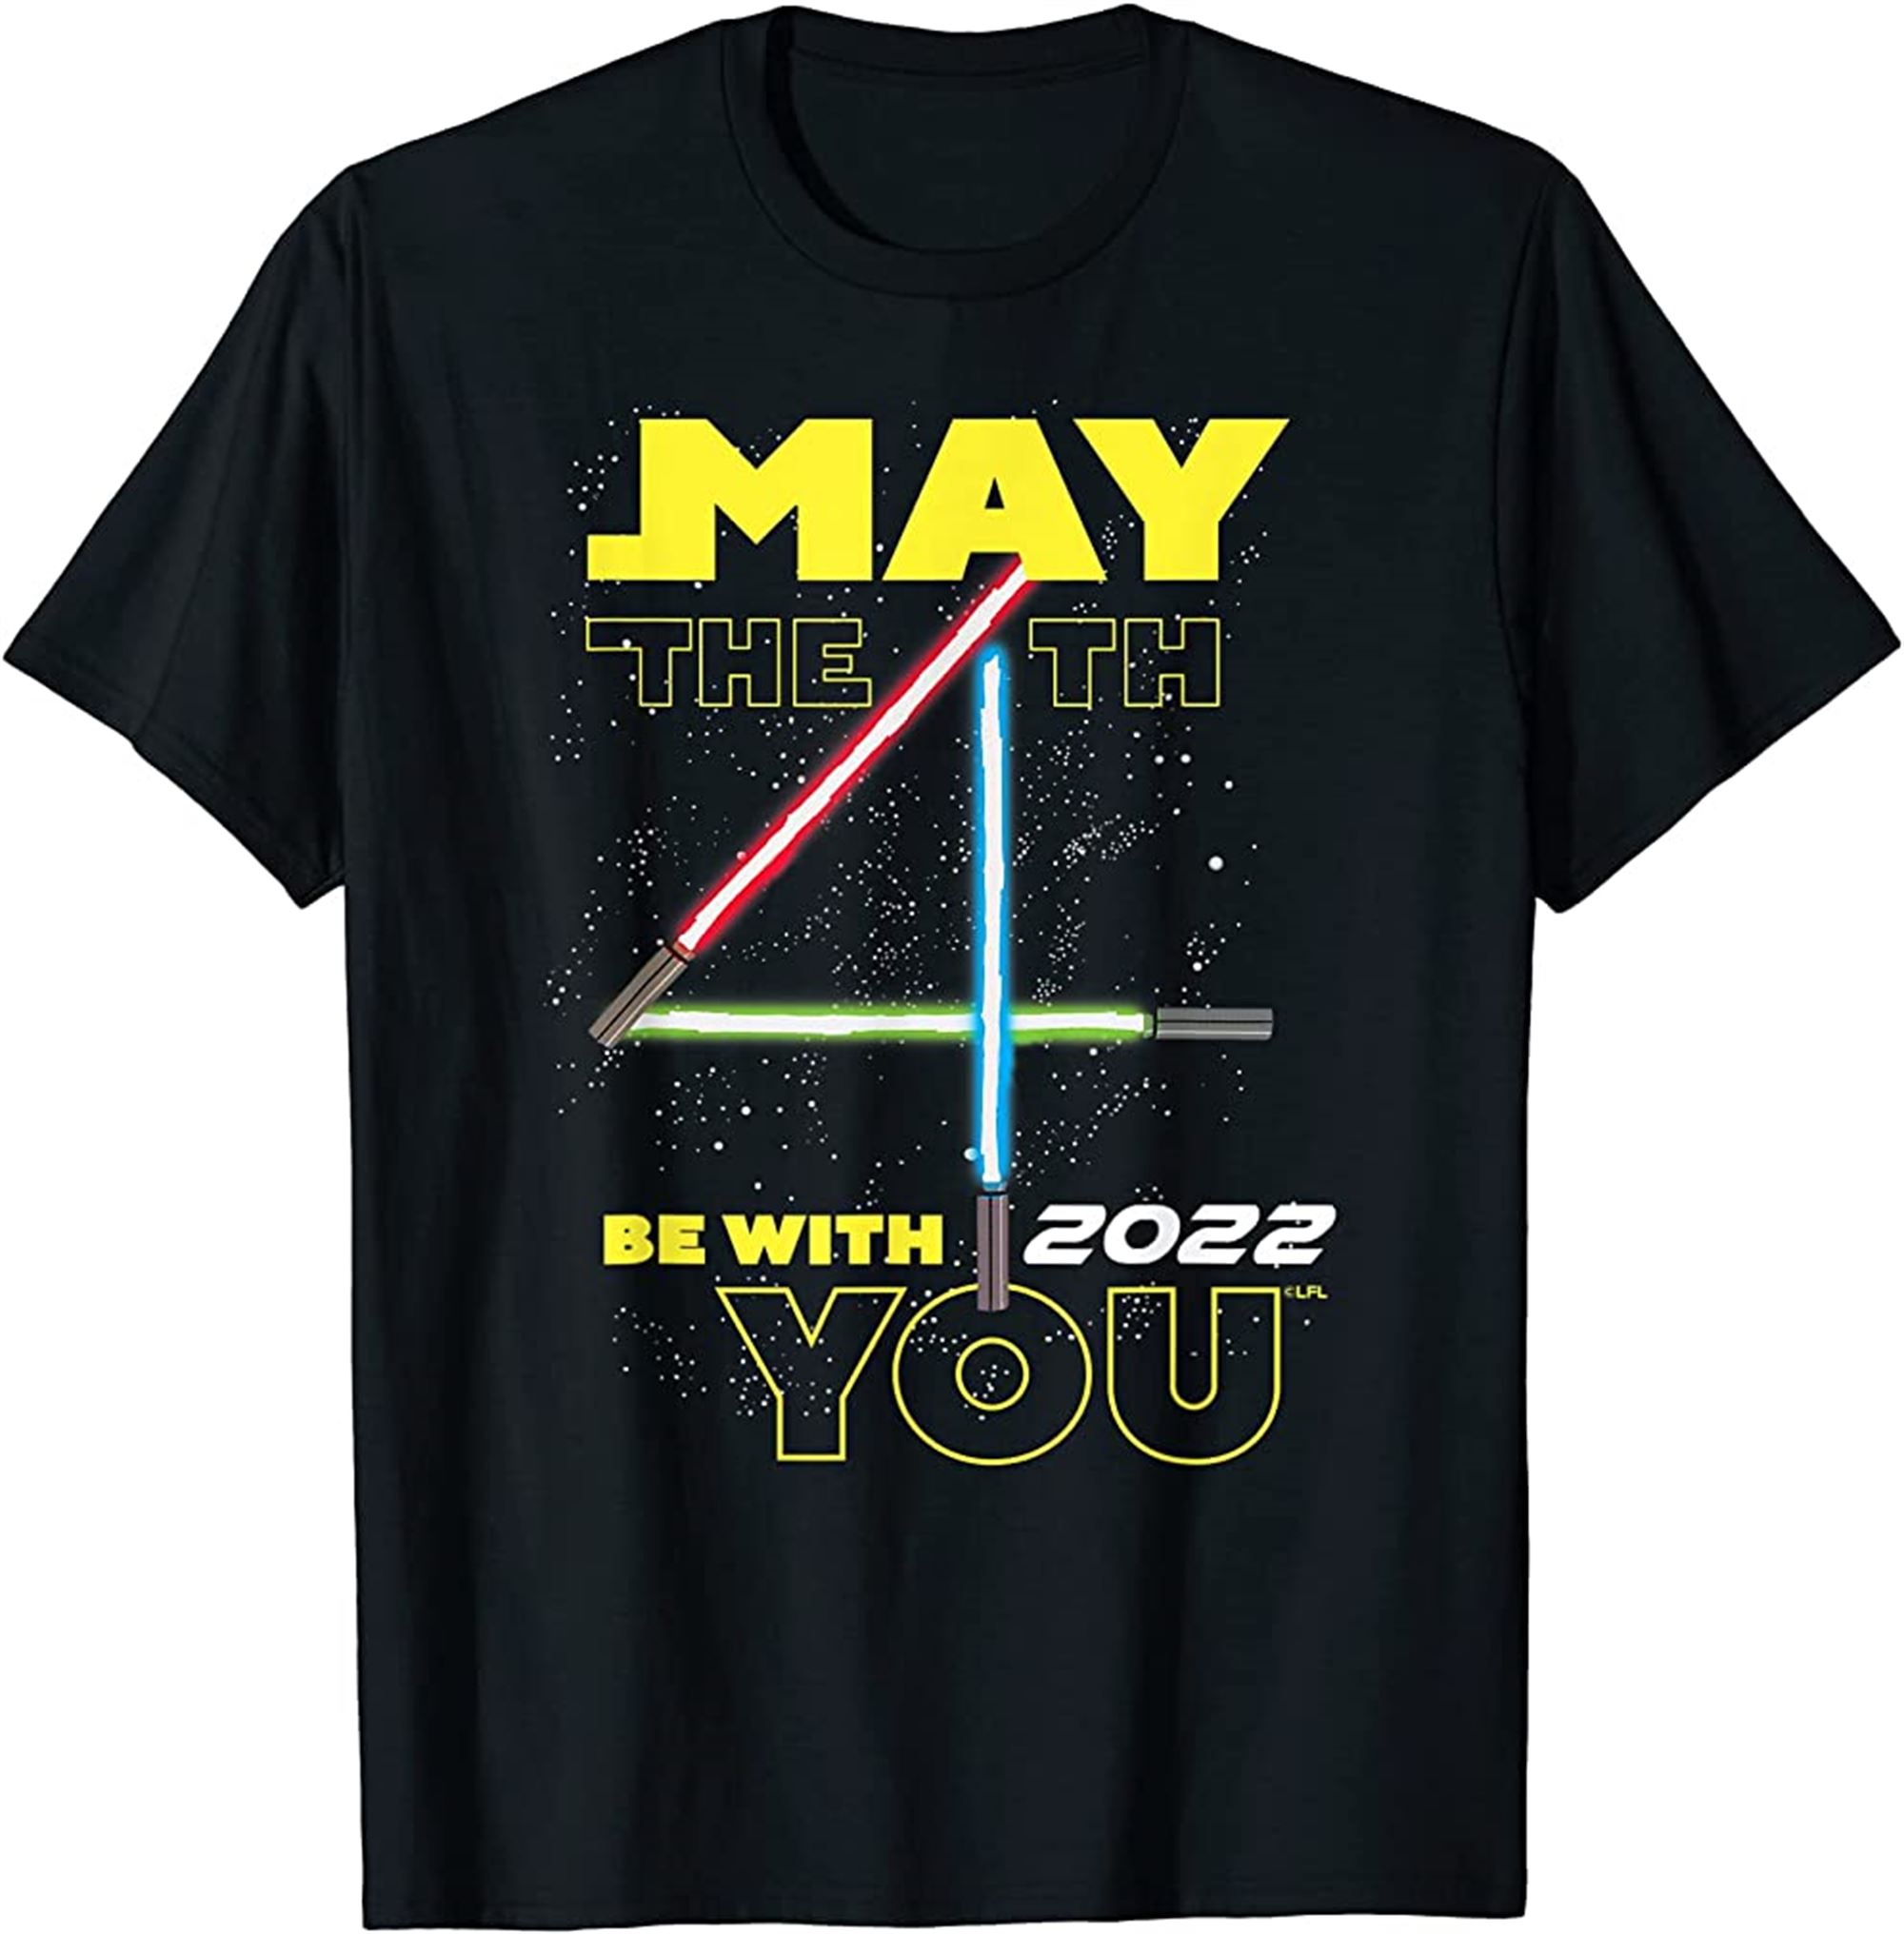 Lightsabers May The 4th Be With You 2022 T-shirt Full Size Up To 5xl